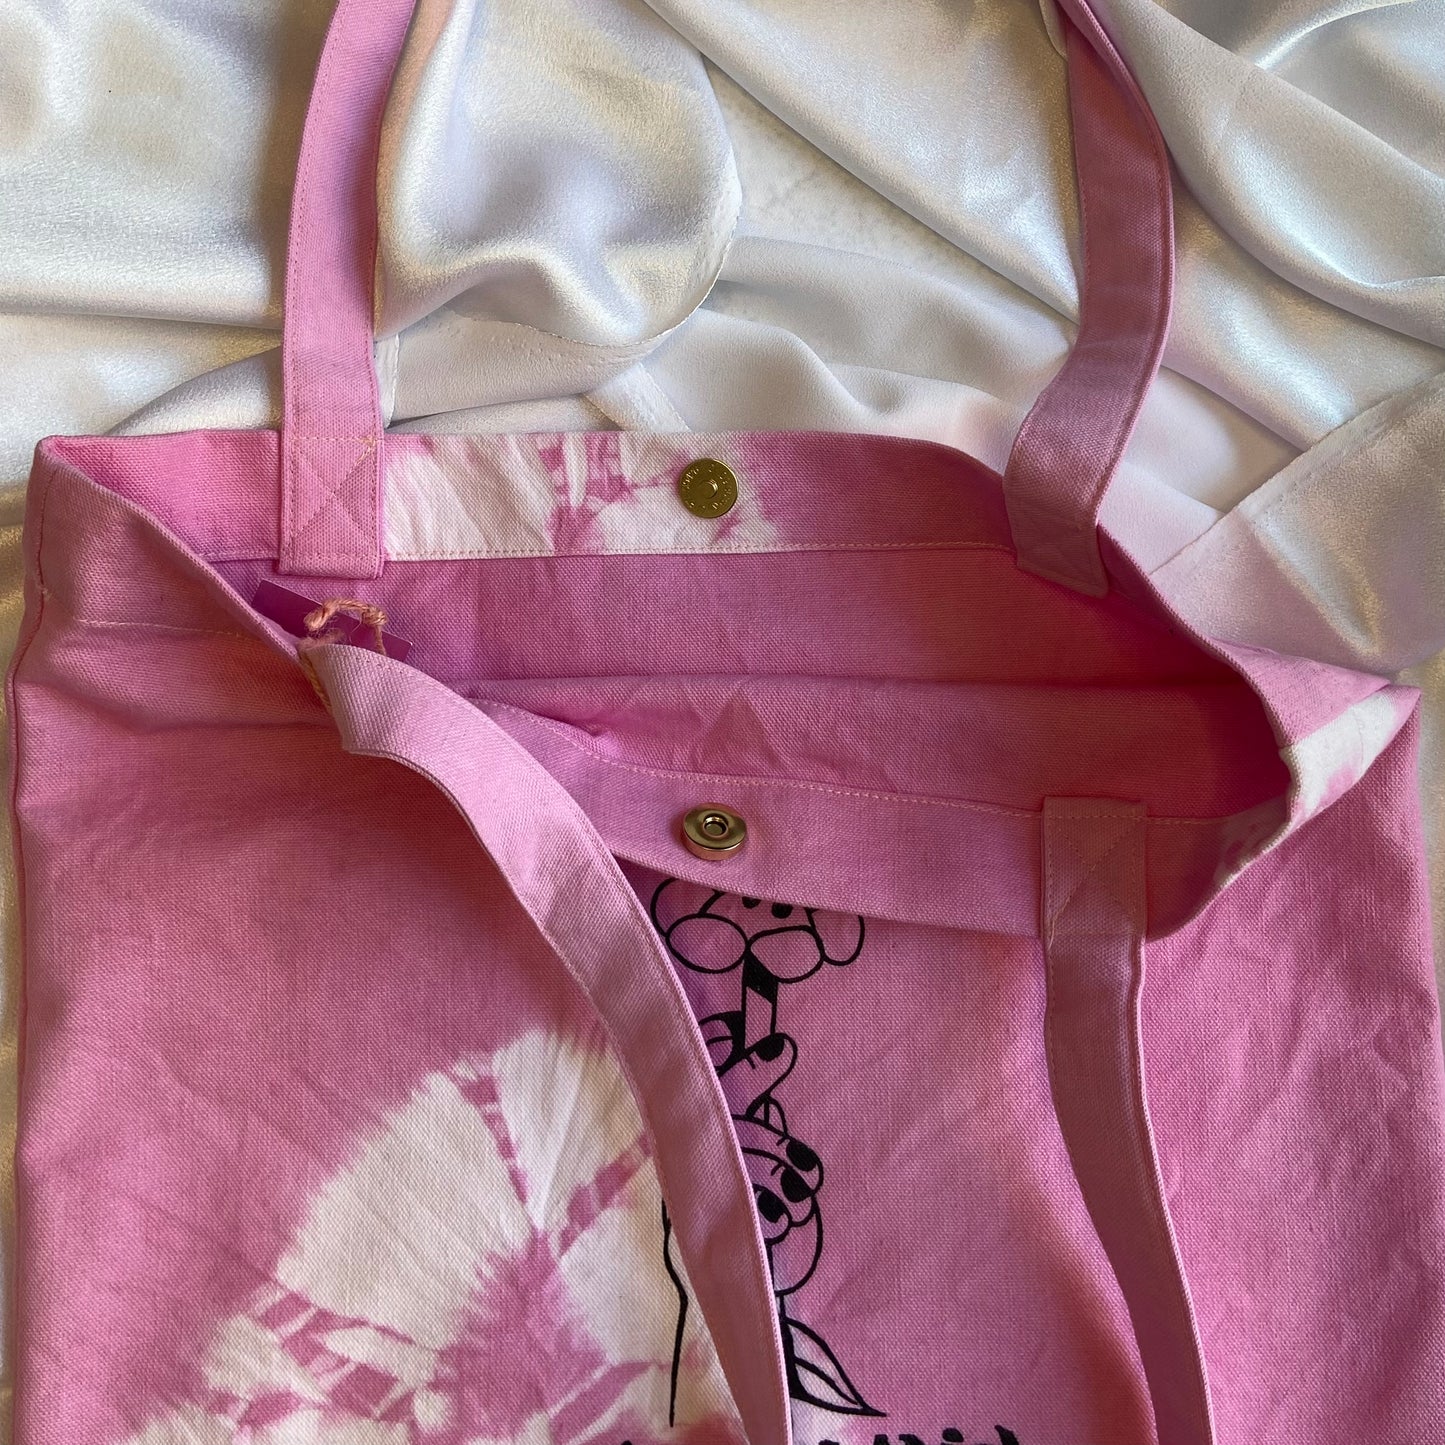 "You've Got This" Pink Tote